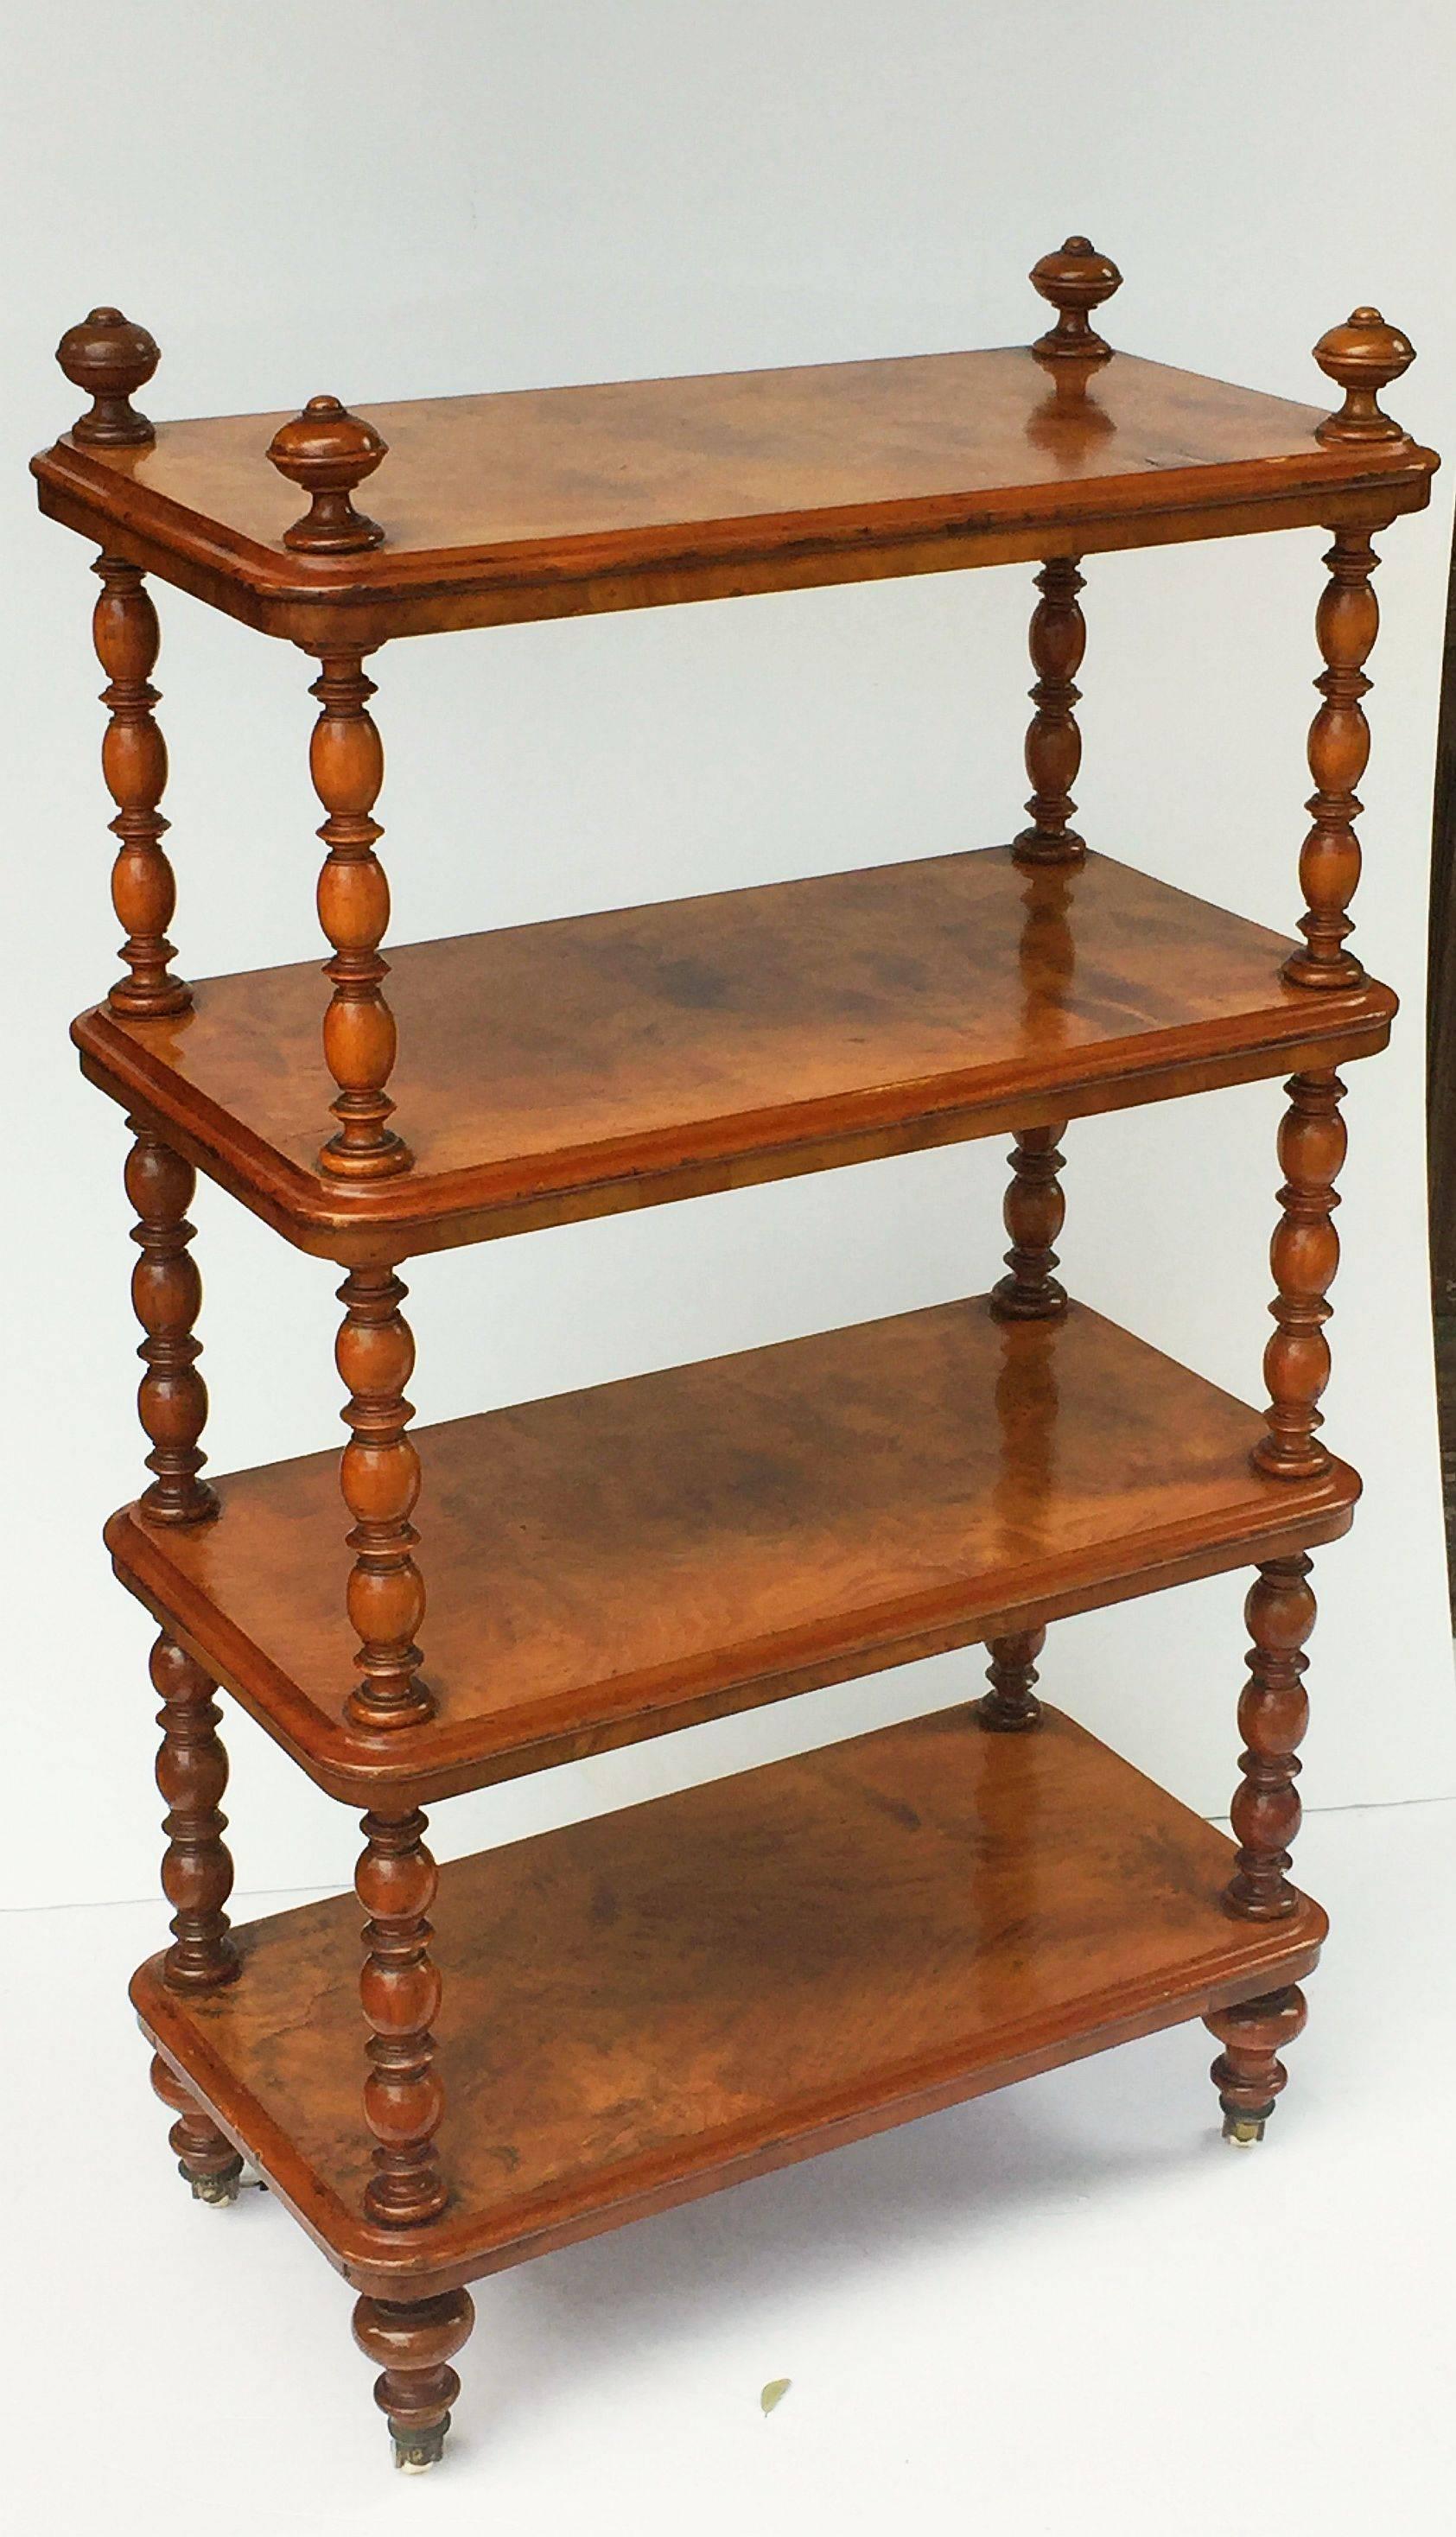 A fine English etagere (whatnot) or set of standing shelves of burled walnut, featuring four rectangular shelves of figured walnut, with moulded edges, mounted to four barley twist supports of turned walnut, with turned finials at top, and turned